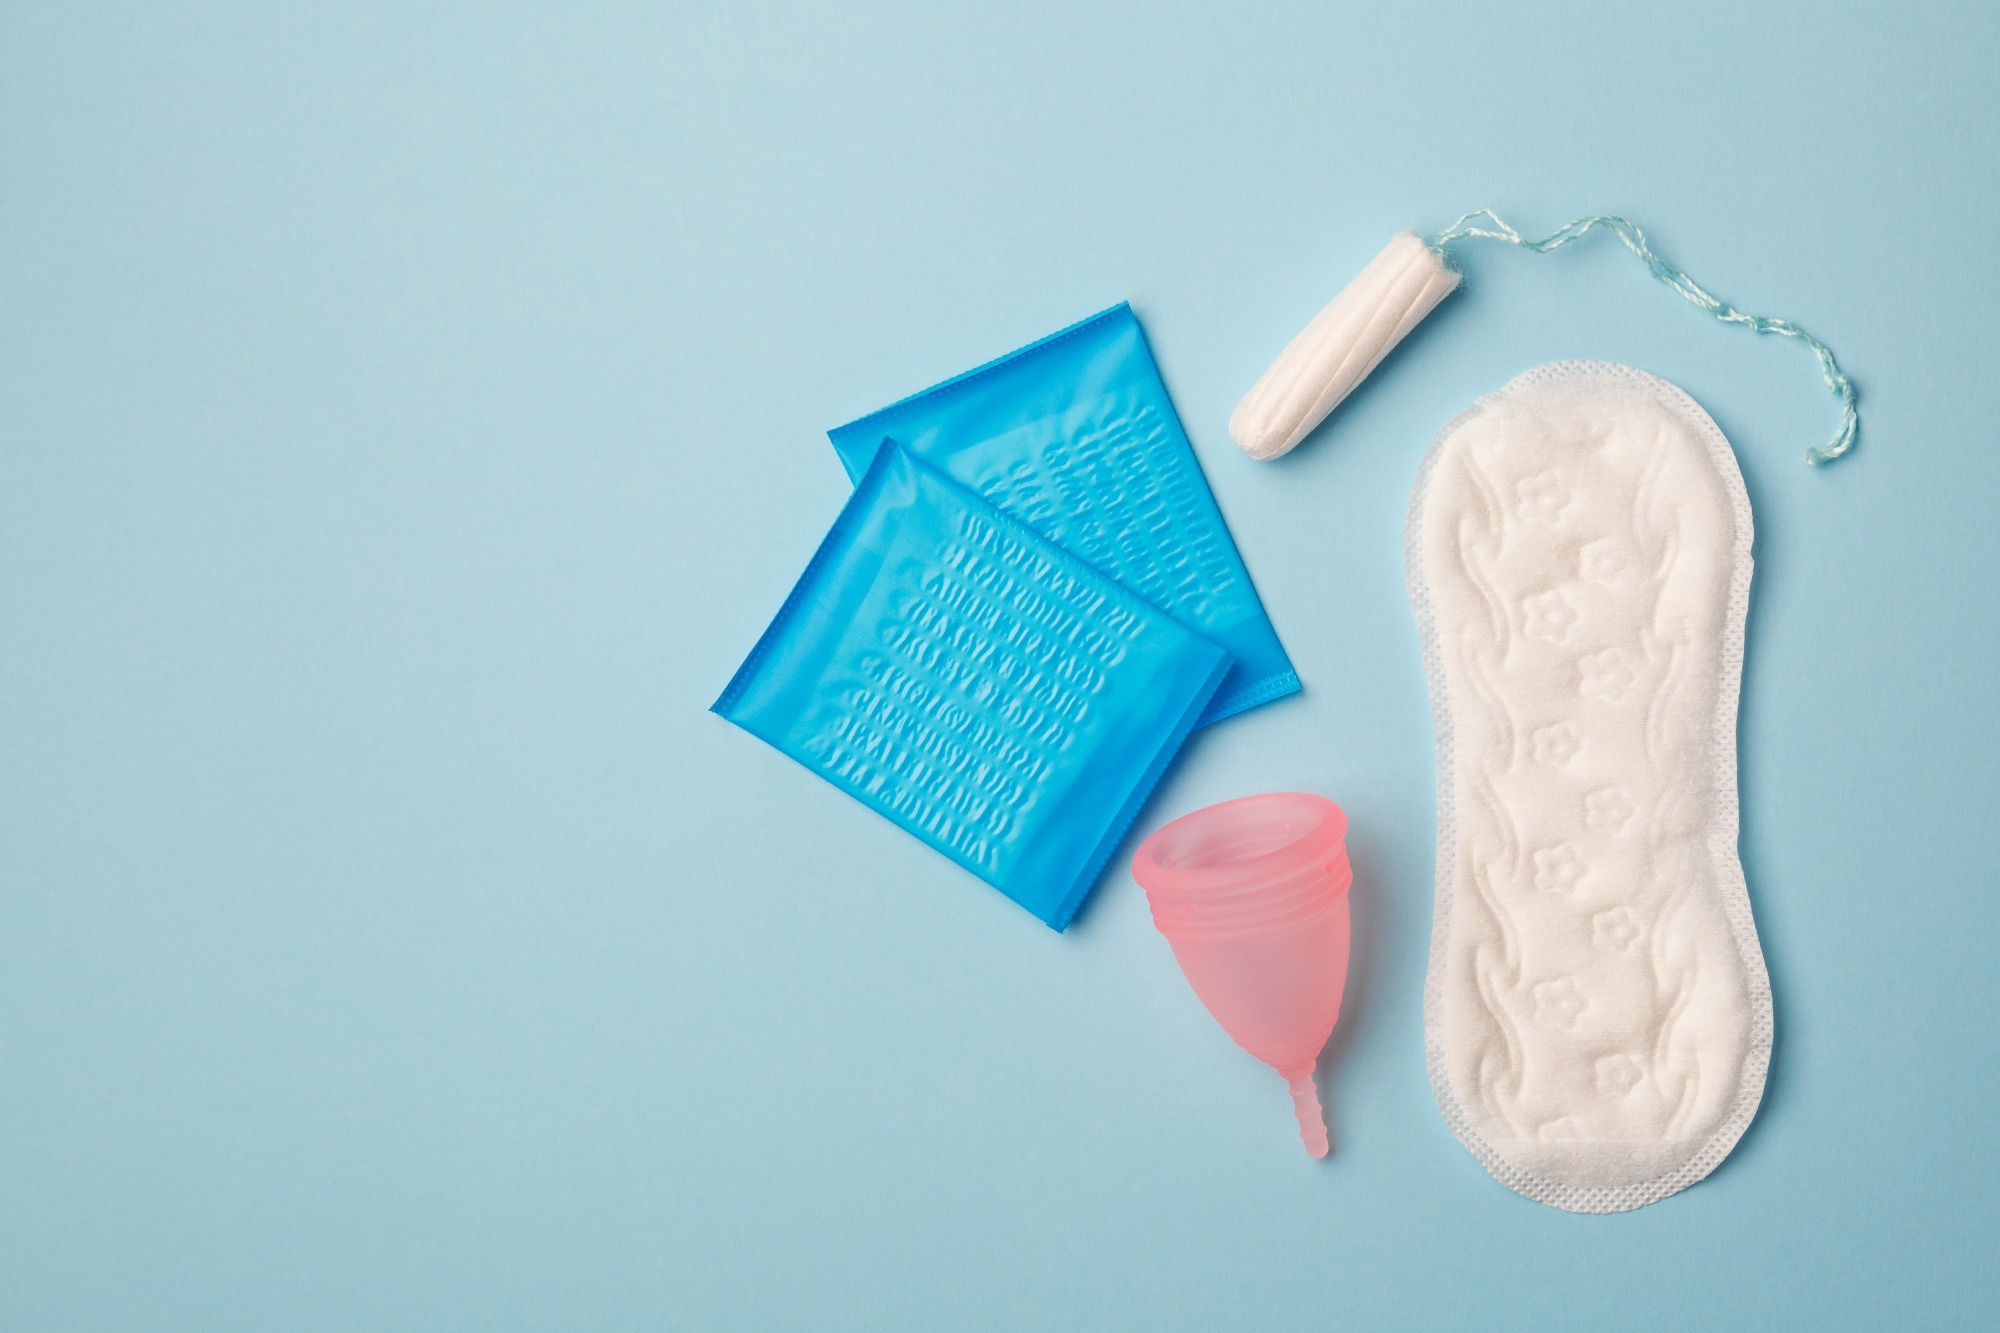 Pad by pad, tampon by tampon we have made huge progress in the